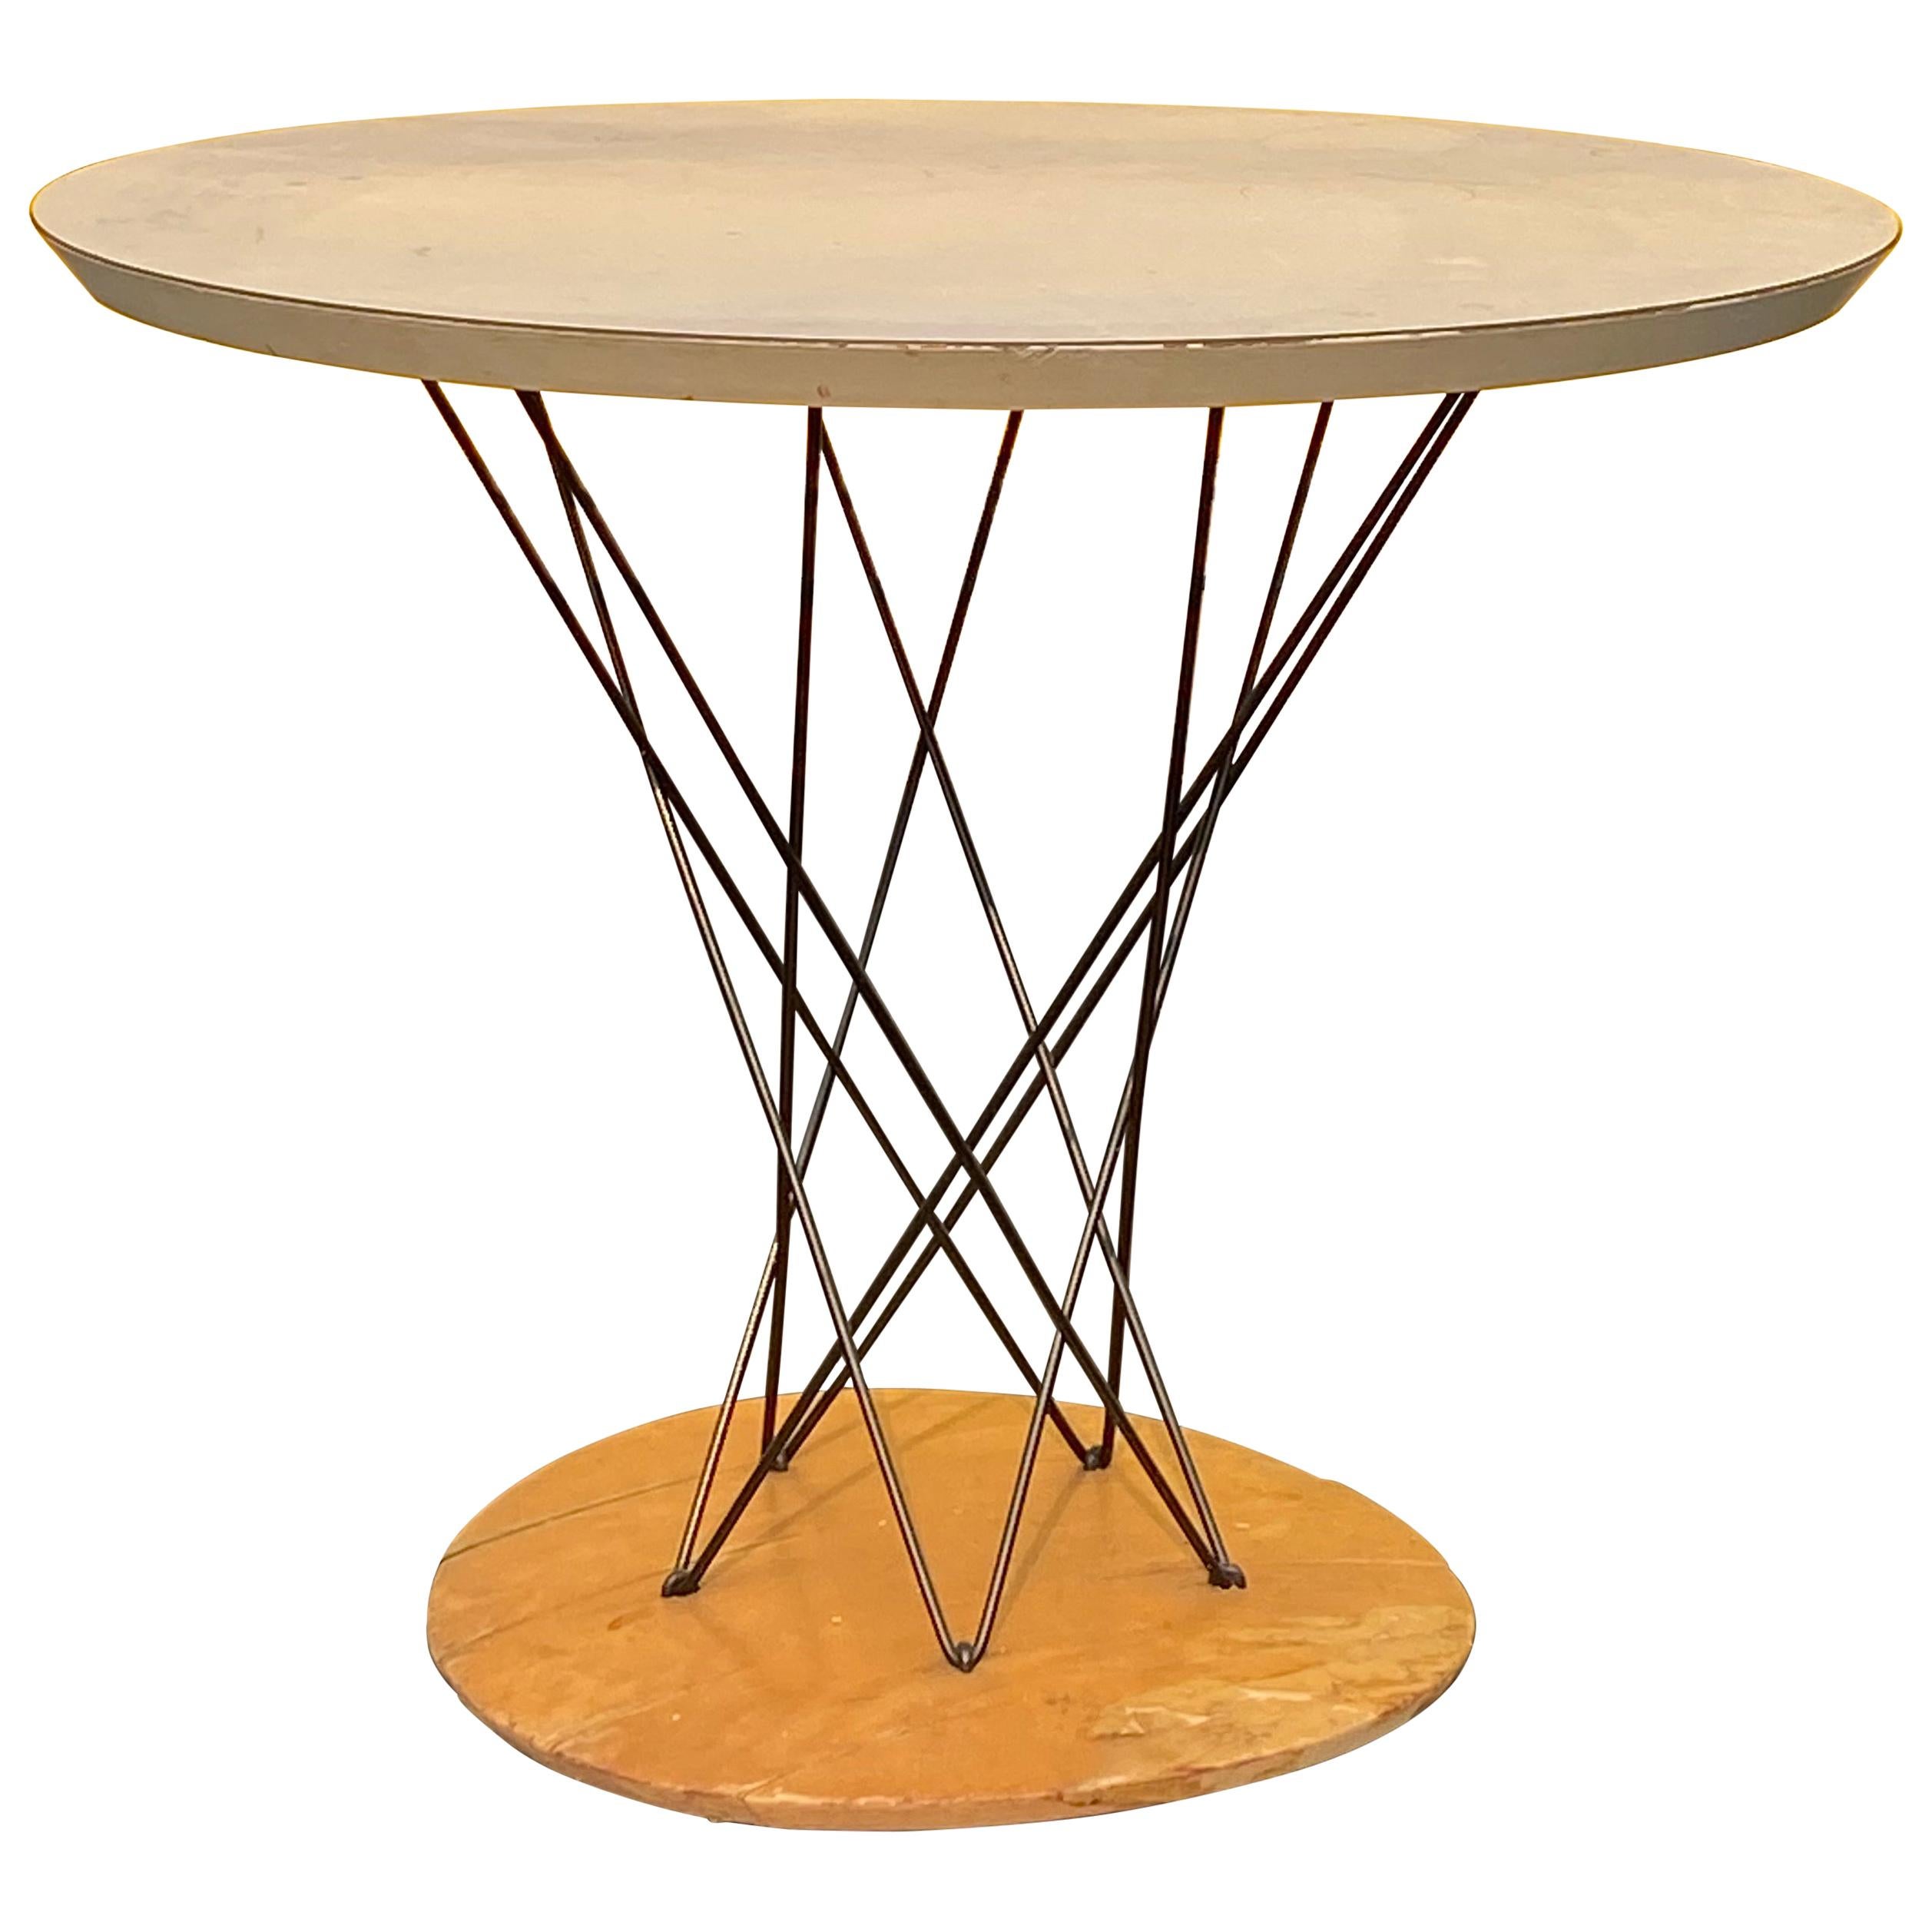 Cyclone Table by Noguchi for Knoll